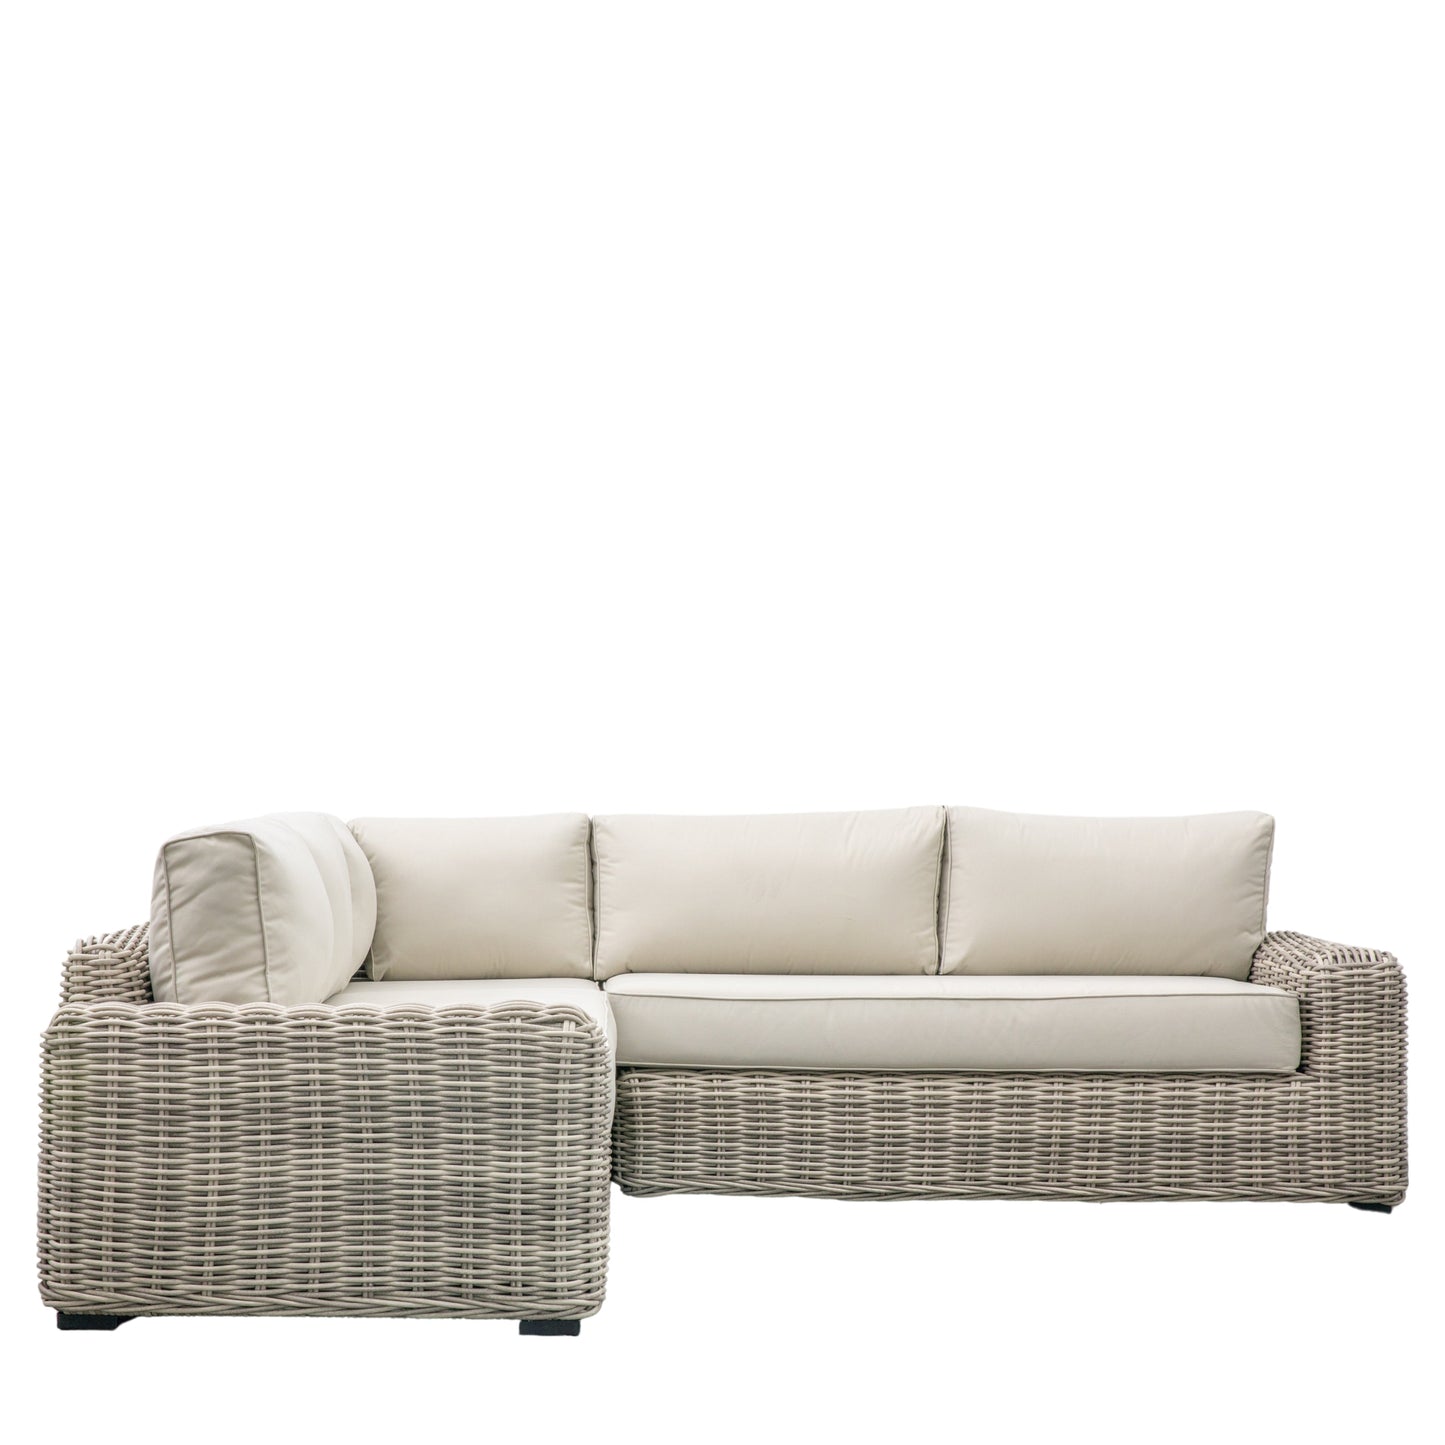 A Churchstow Corner Lounge Set with cushions for interior decor.